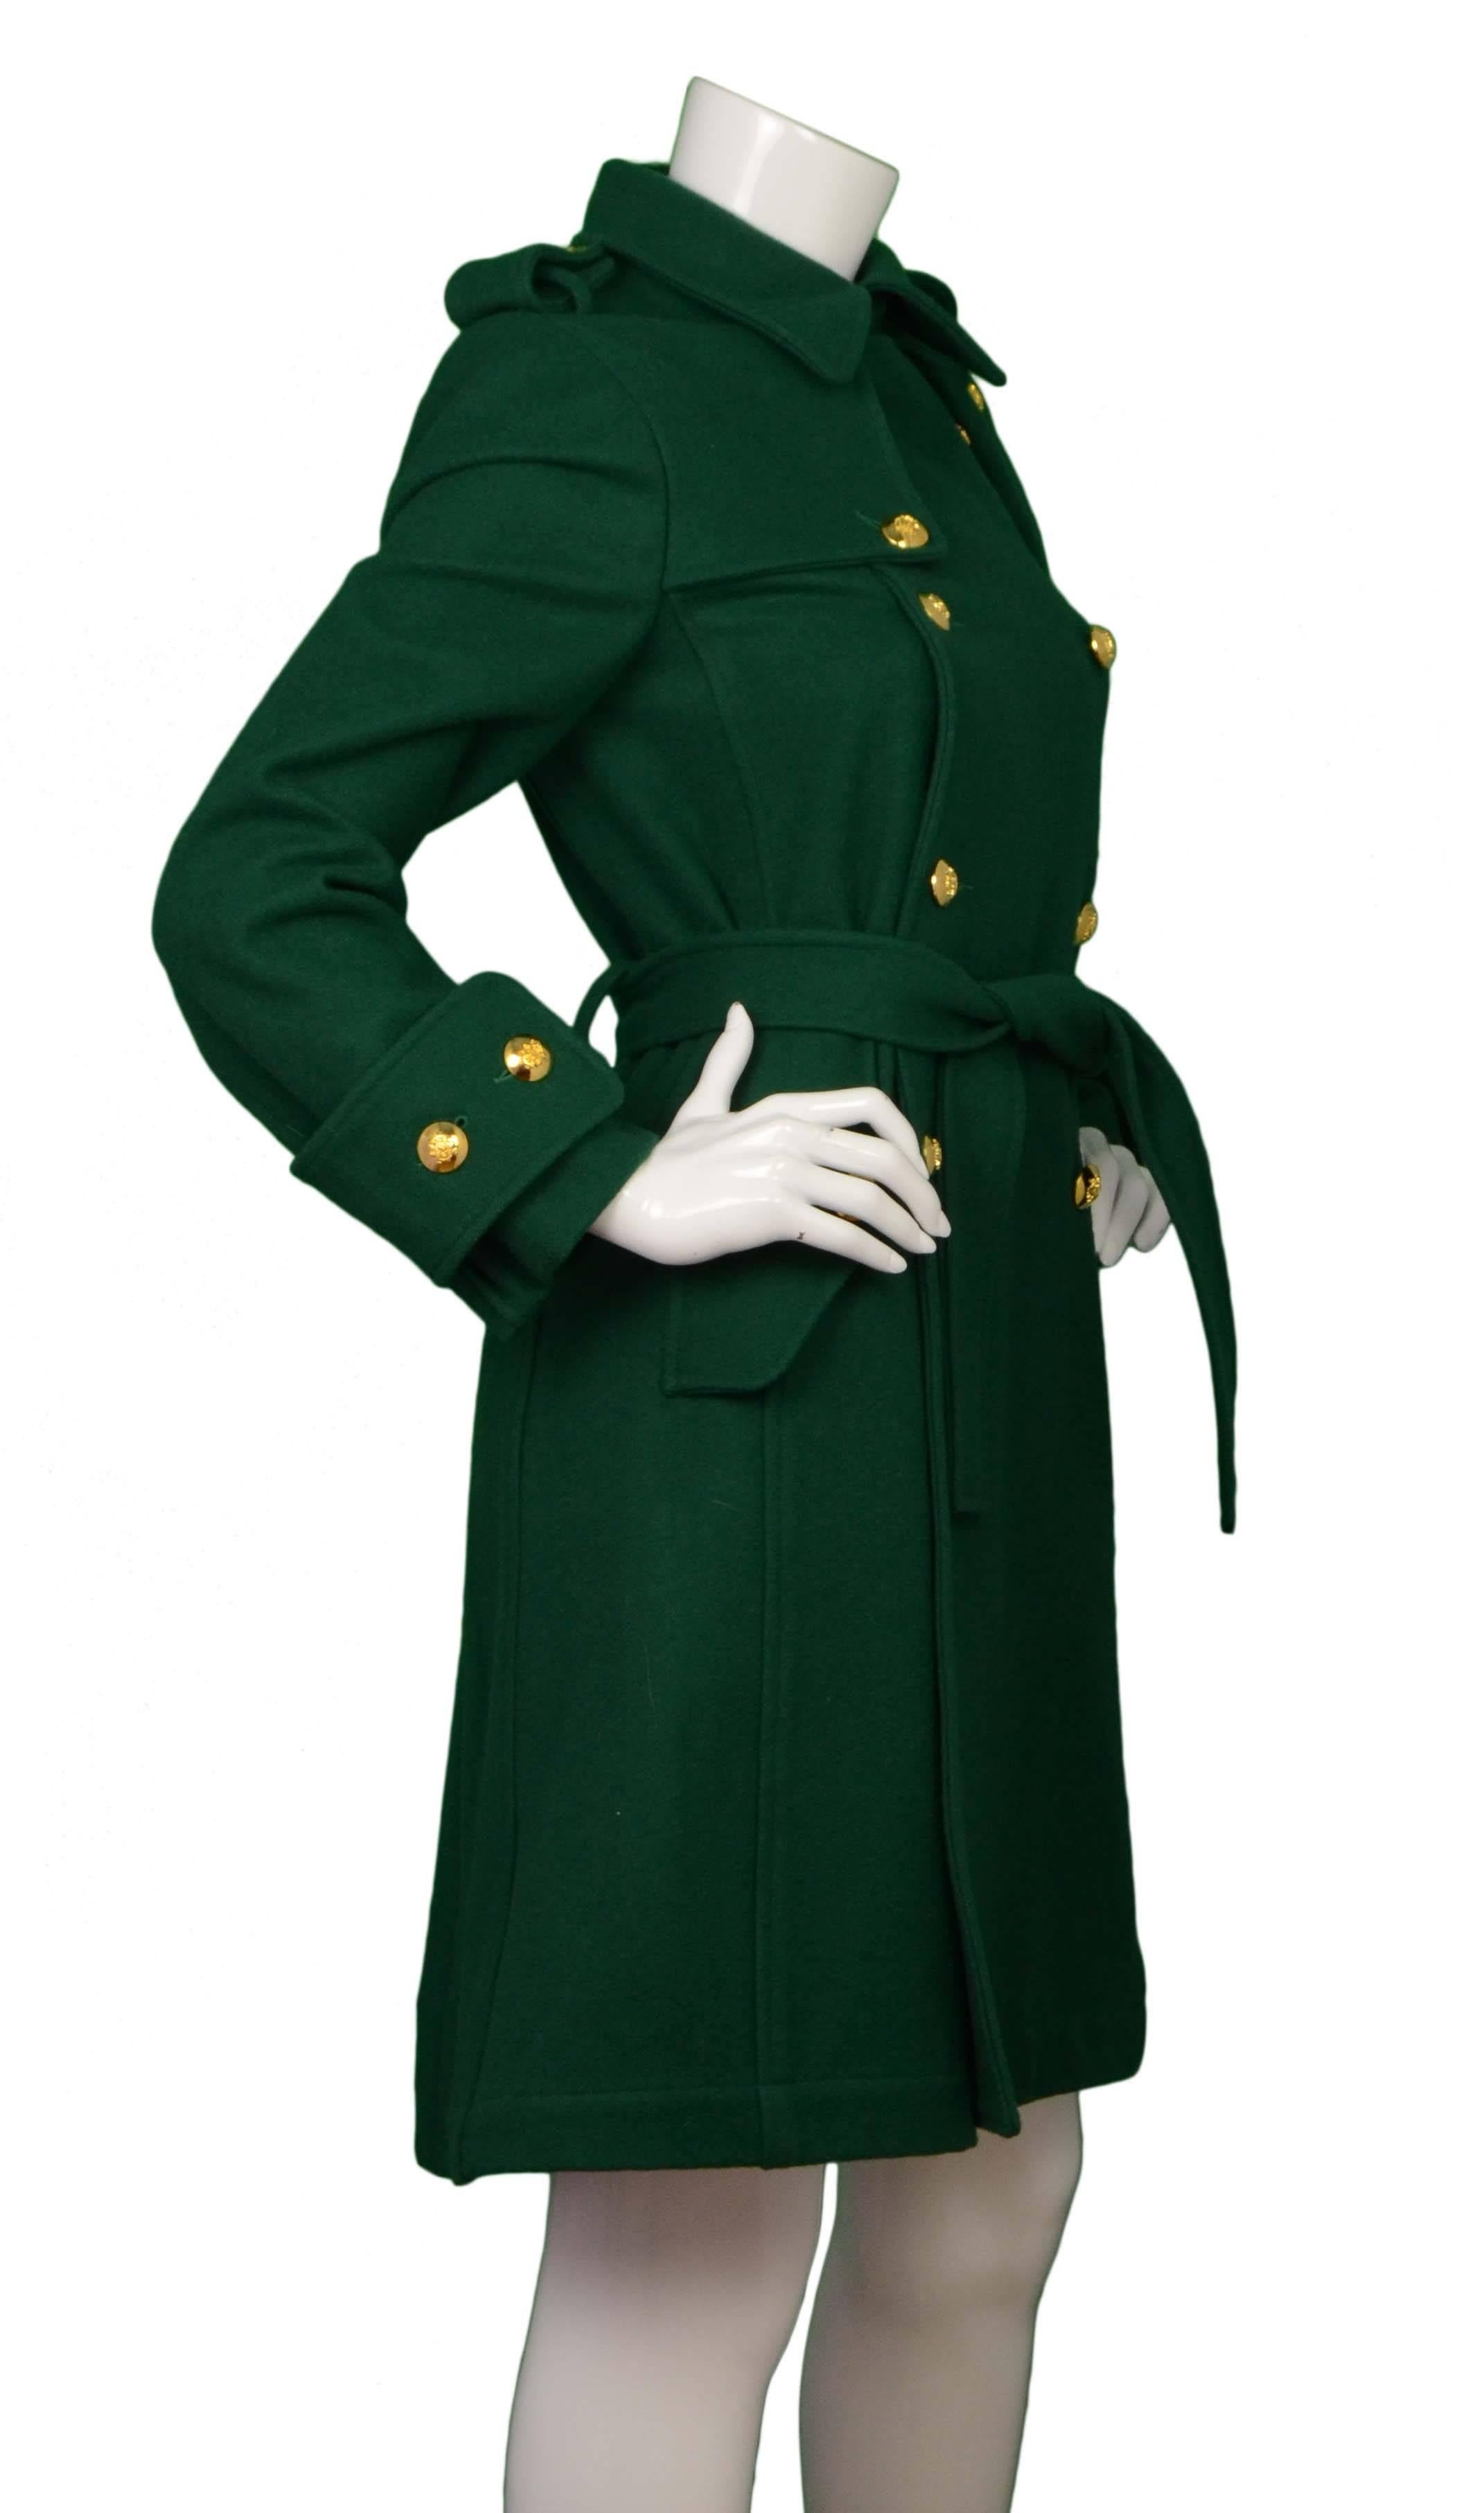 Camilla and Marc Green Wool Katherine Coat 
Features large gold buttons with intricate detailing
Made In: Australia
Color: Green
Composition: 100% wool
Lining: Black, 100 acetate
Closure/Opening: Double breasted button down closure
Exterior